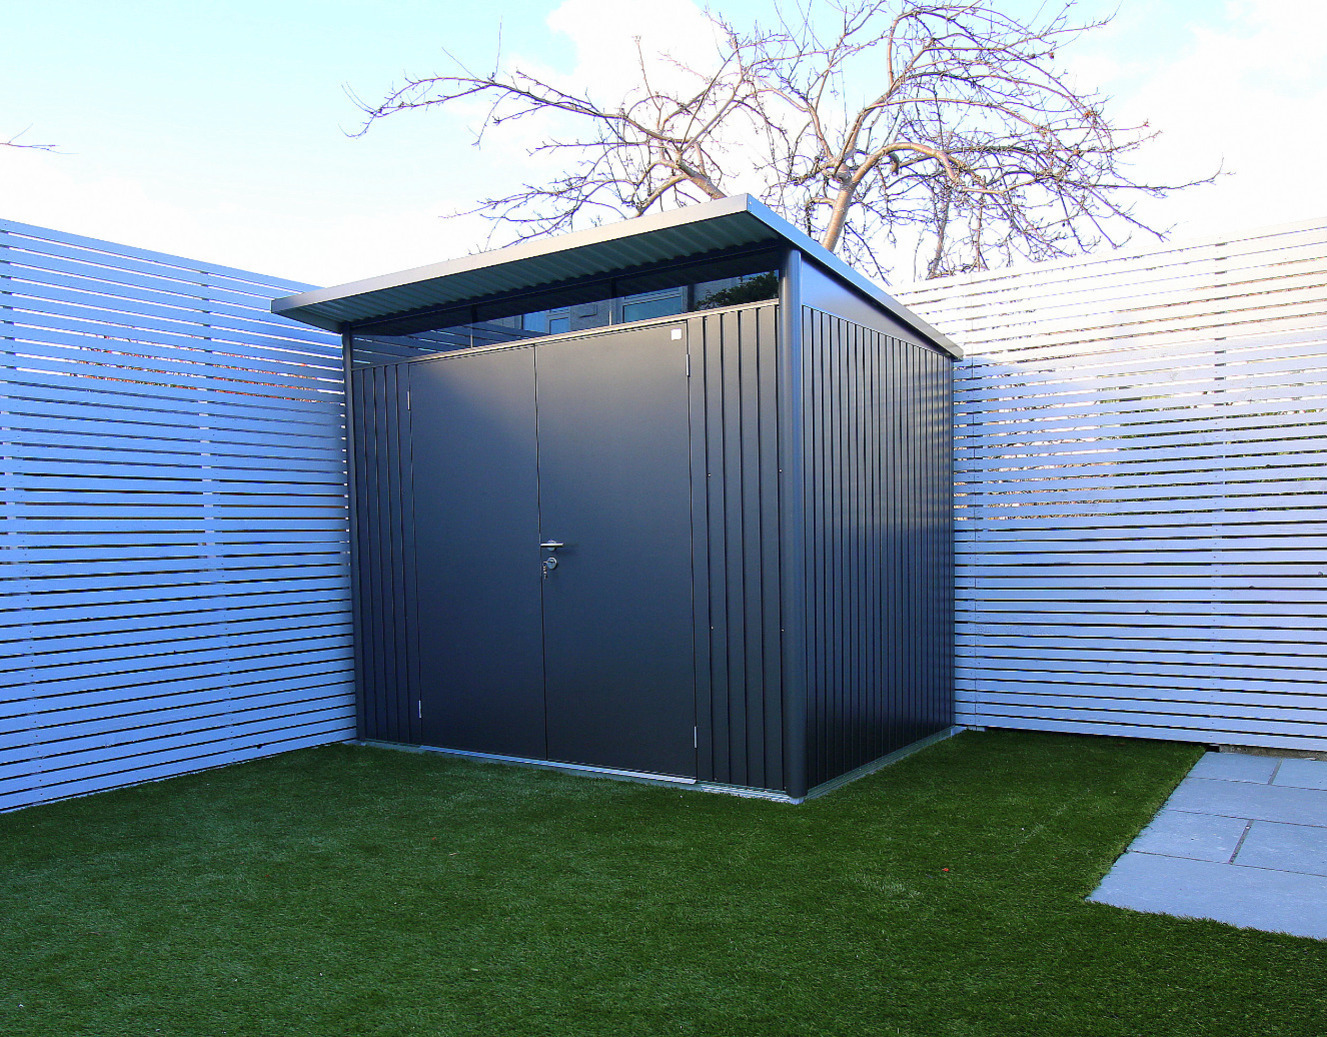 The Biohort AvantGarde A5 in metallic dark grey with double doors is contemporary garden shed storage at its best. Supplied + Fitted in Templeogue, Dublin 6W  | Owen Chubb Garden Landscapers - Ireland's #1 Biohort Dealer for  Value & Service. Tel 087-2306 128